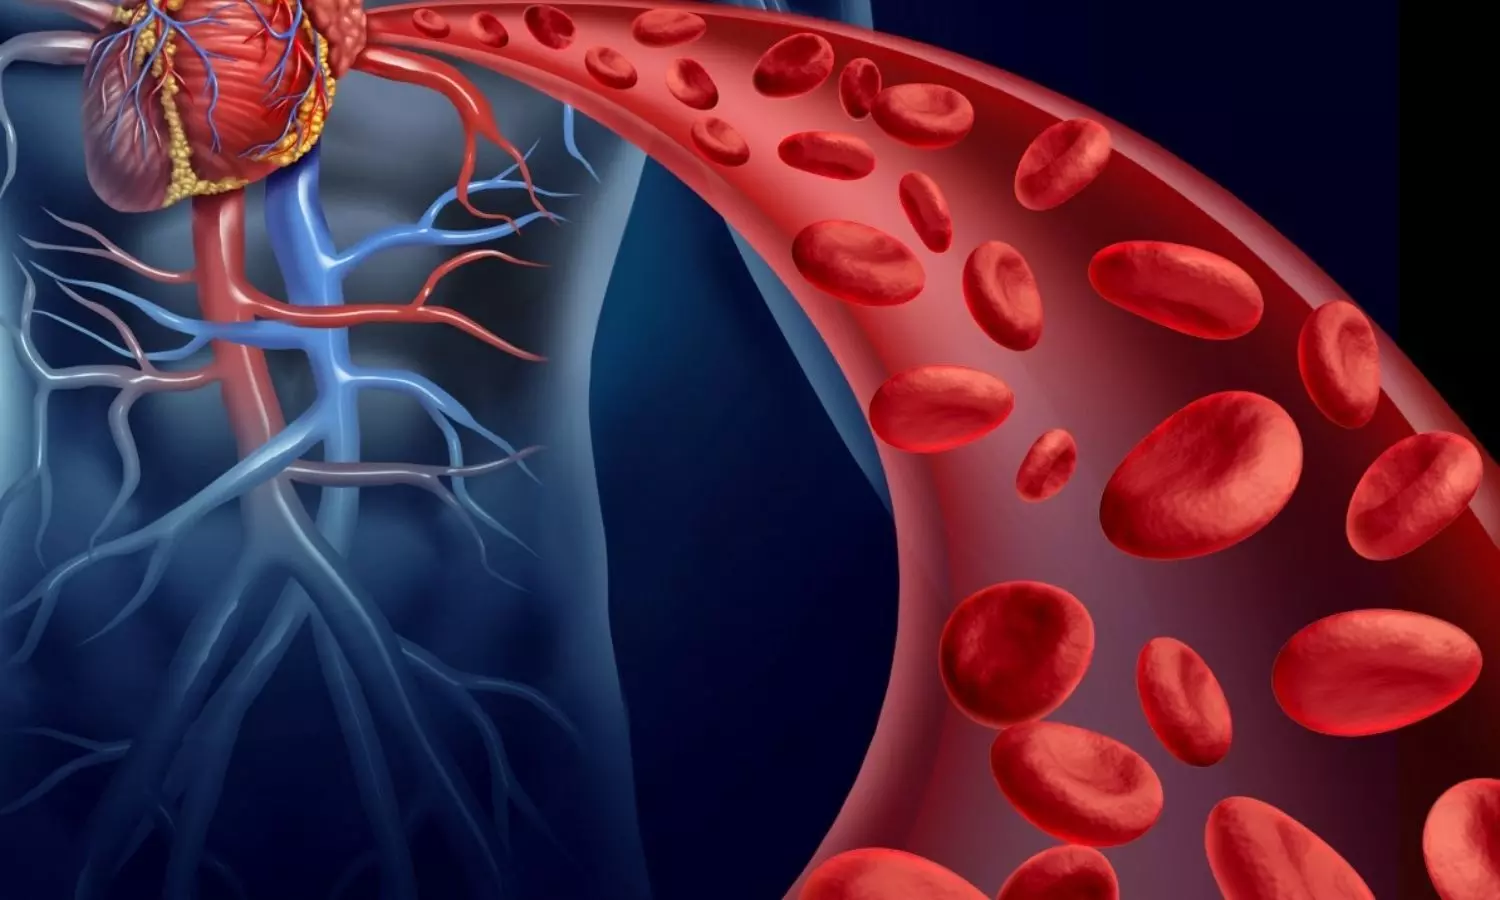 Hydroxyurea improves cardiac abnormalities in young patients with sickle cell anemia: Study